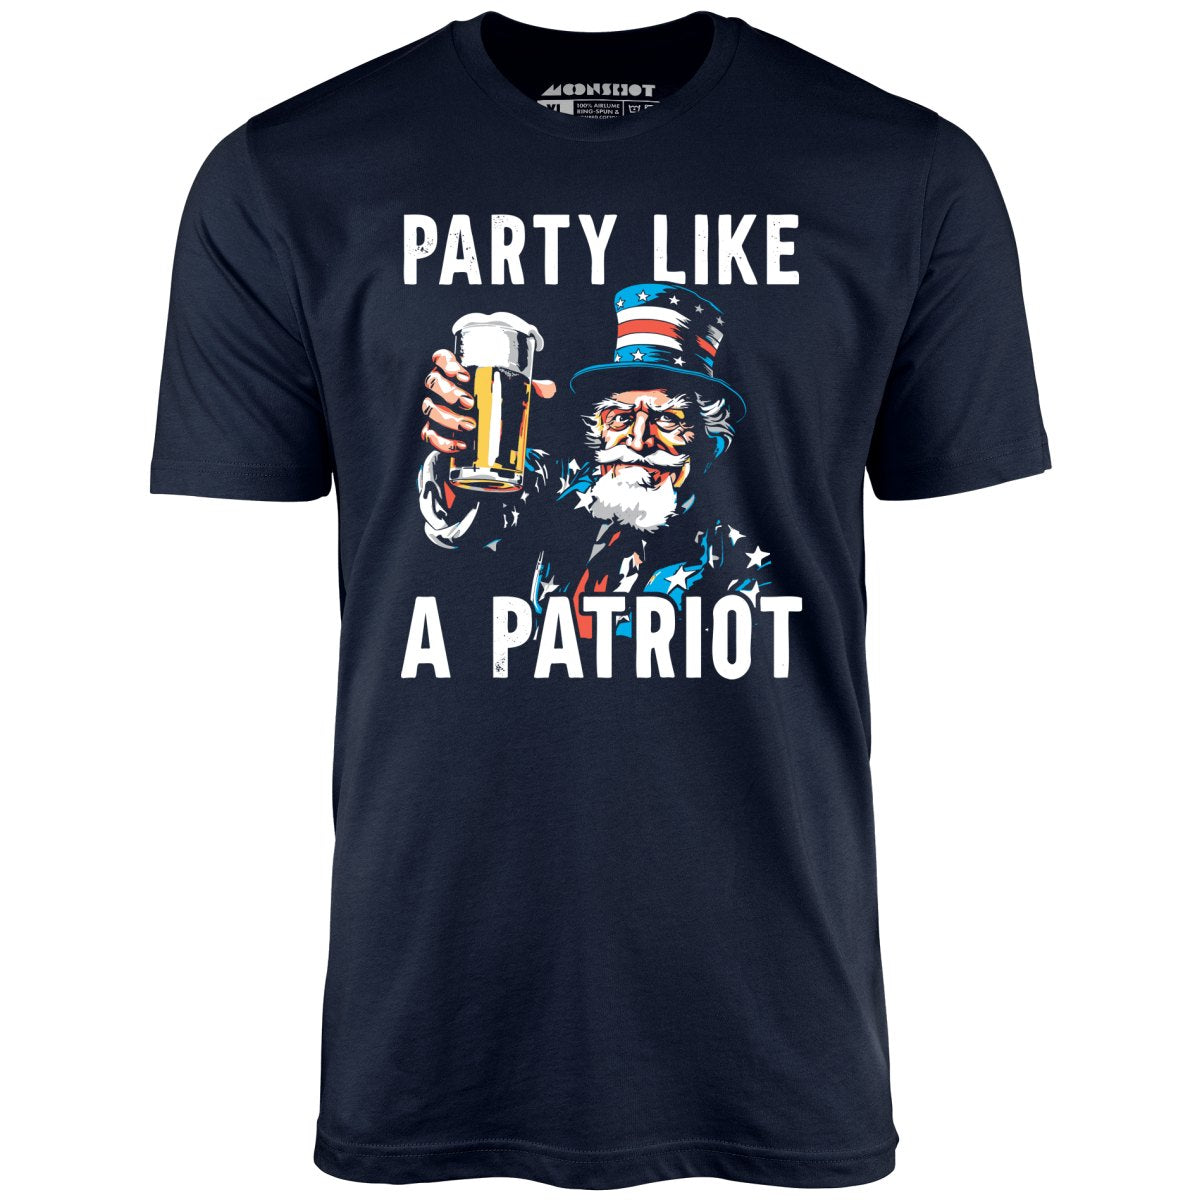 Party Like a Patriot - Unisex T-Shirt